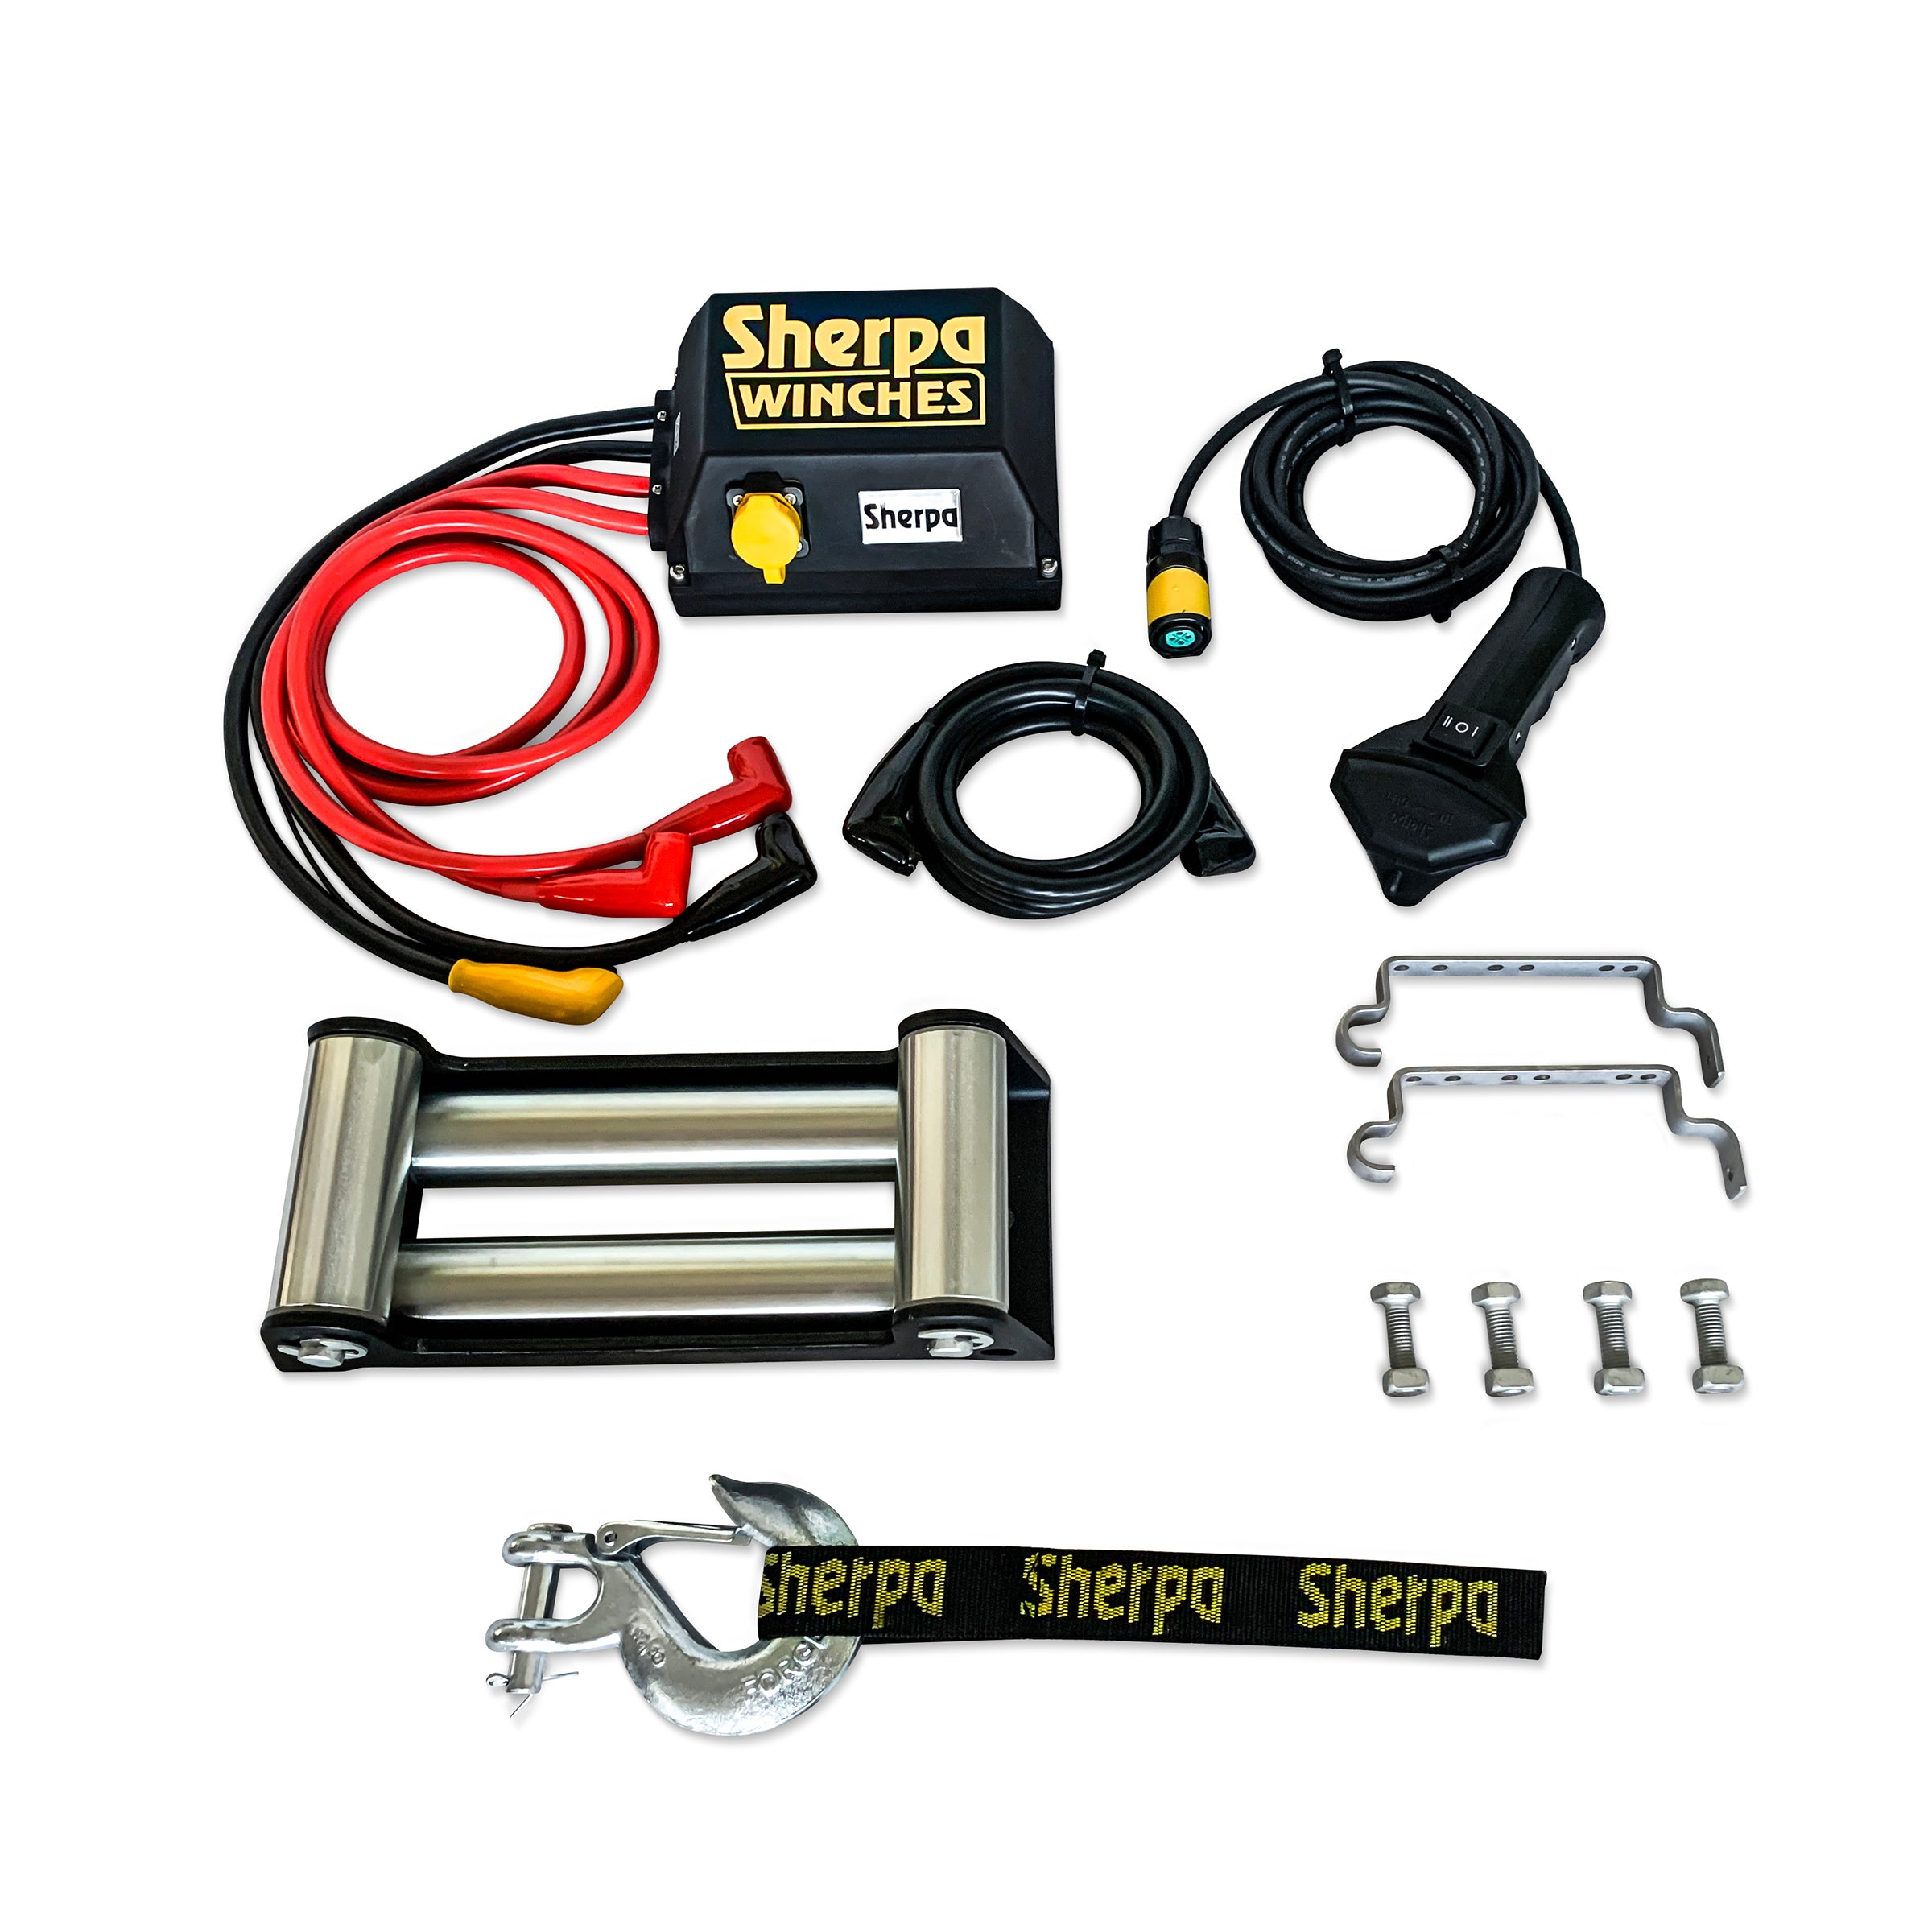 Sherpa cable winch kit accessories